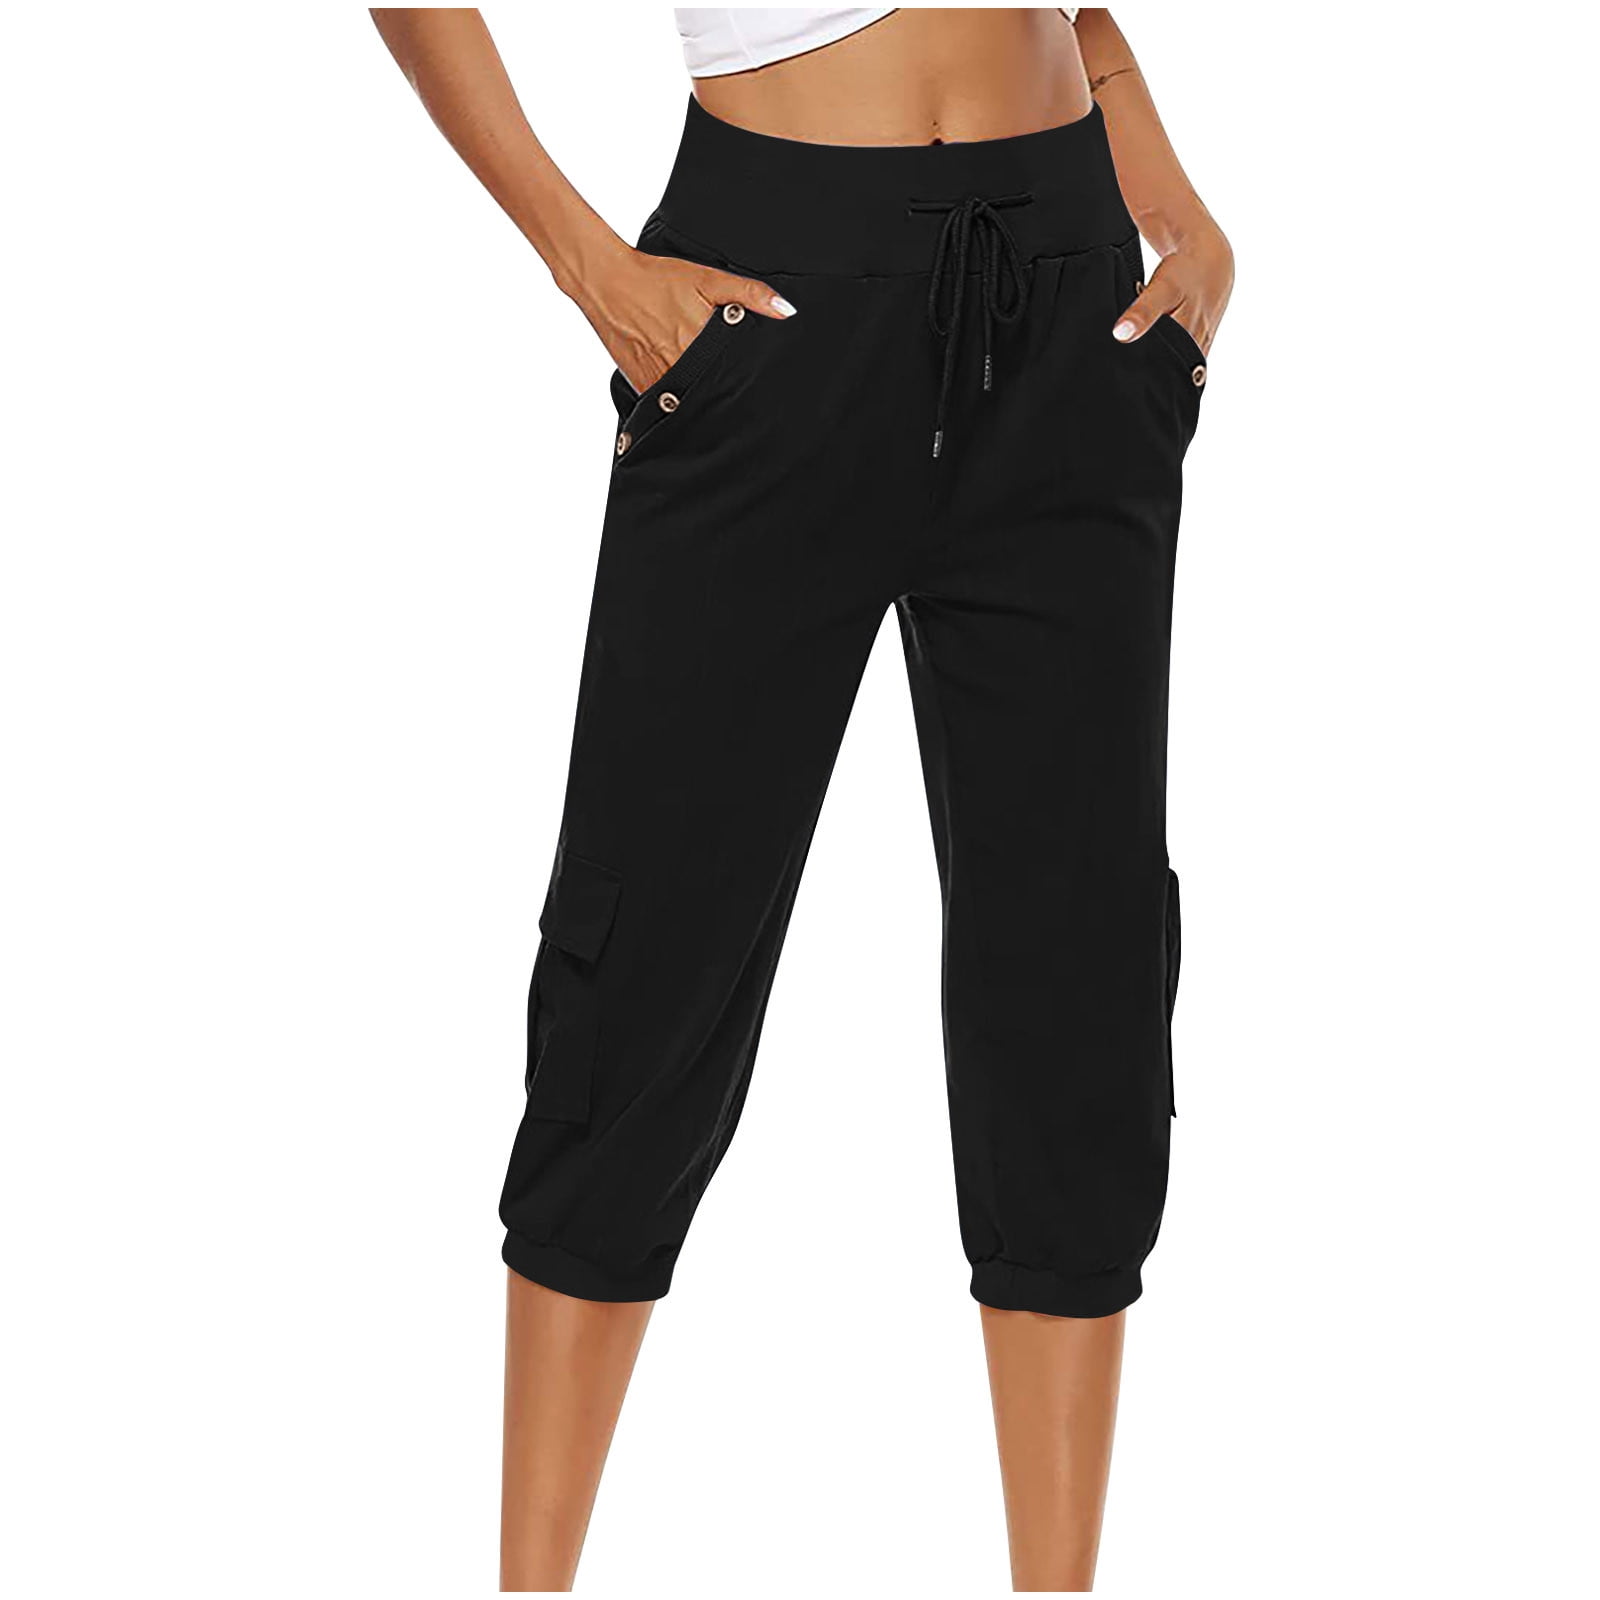 Cropped Sweatpants for Women Summer Plus Size High Waisted Drawstring Sweat  Pants Yoga Sports Workout Capris